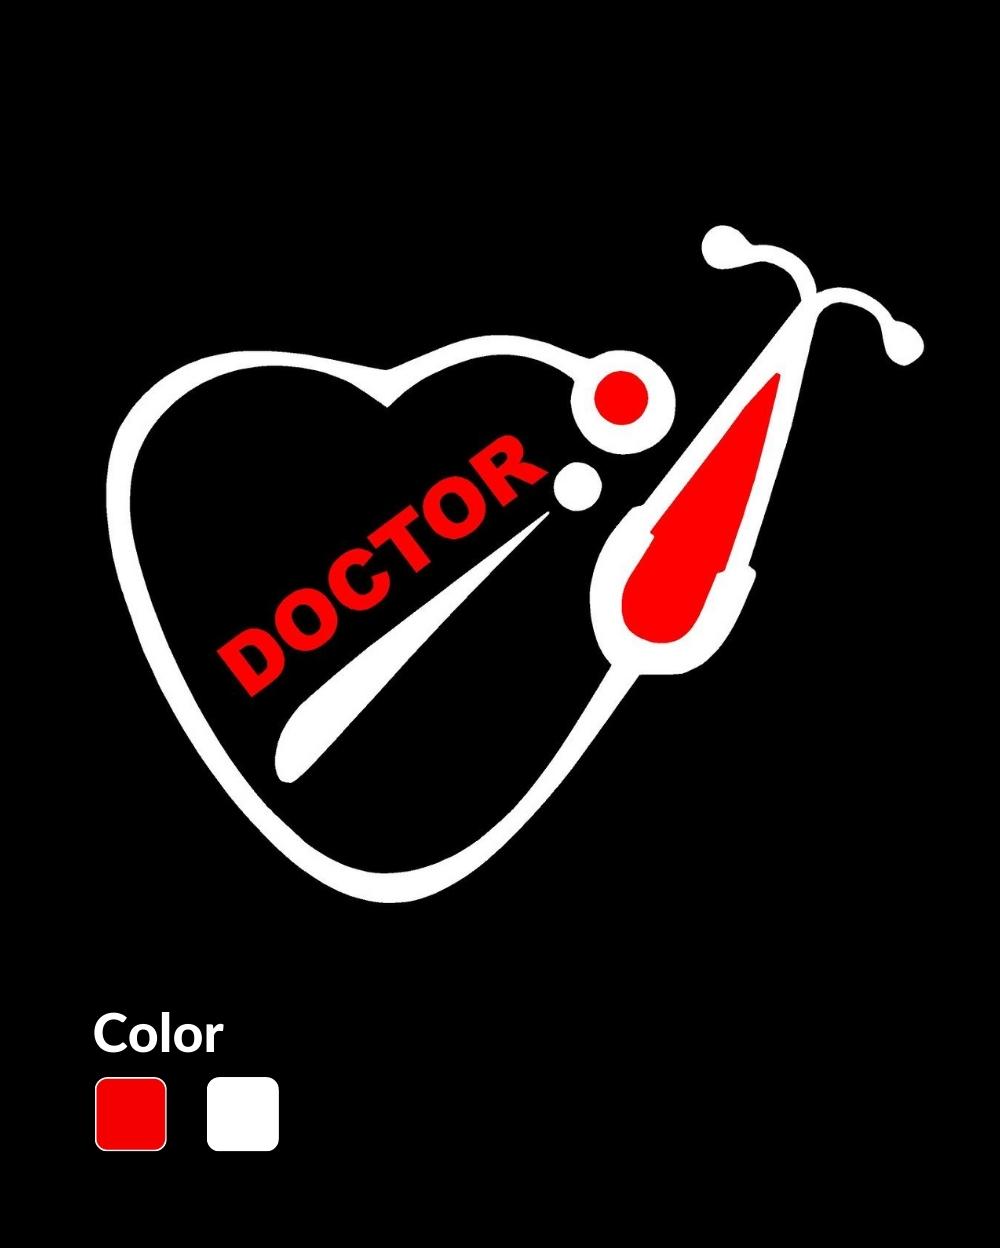 VVWV Dr Doctor Stethoscope Heart Logo Stickers for Car Side Multi-Colored L  X H 15.20 X 12.70 Cm : Amazon.in: Car & Motorbike